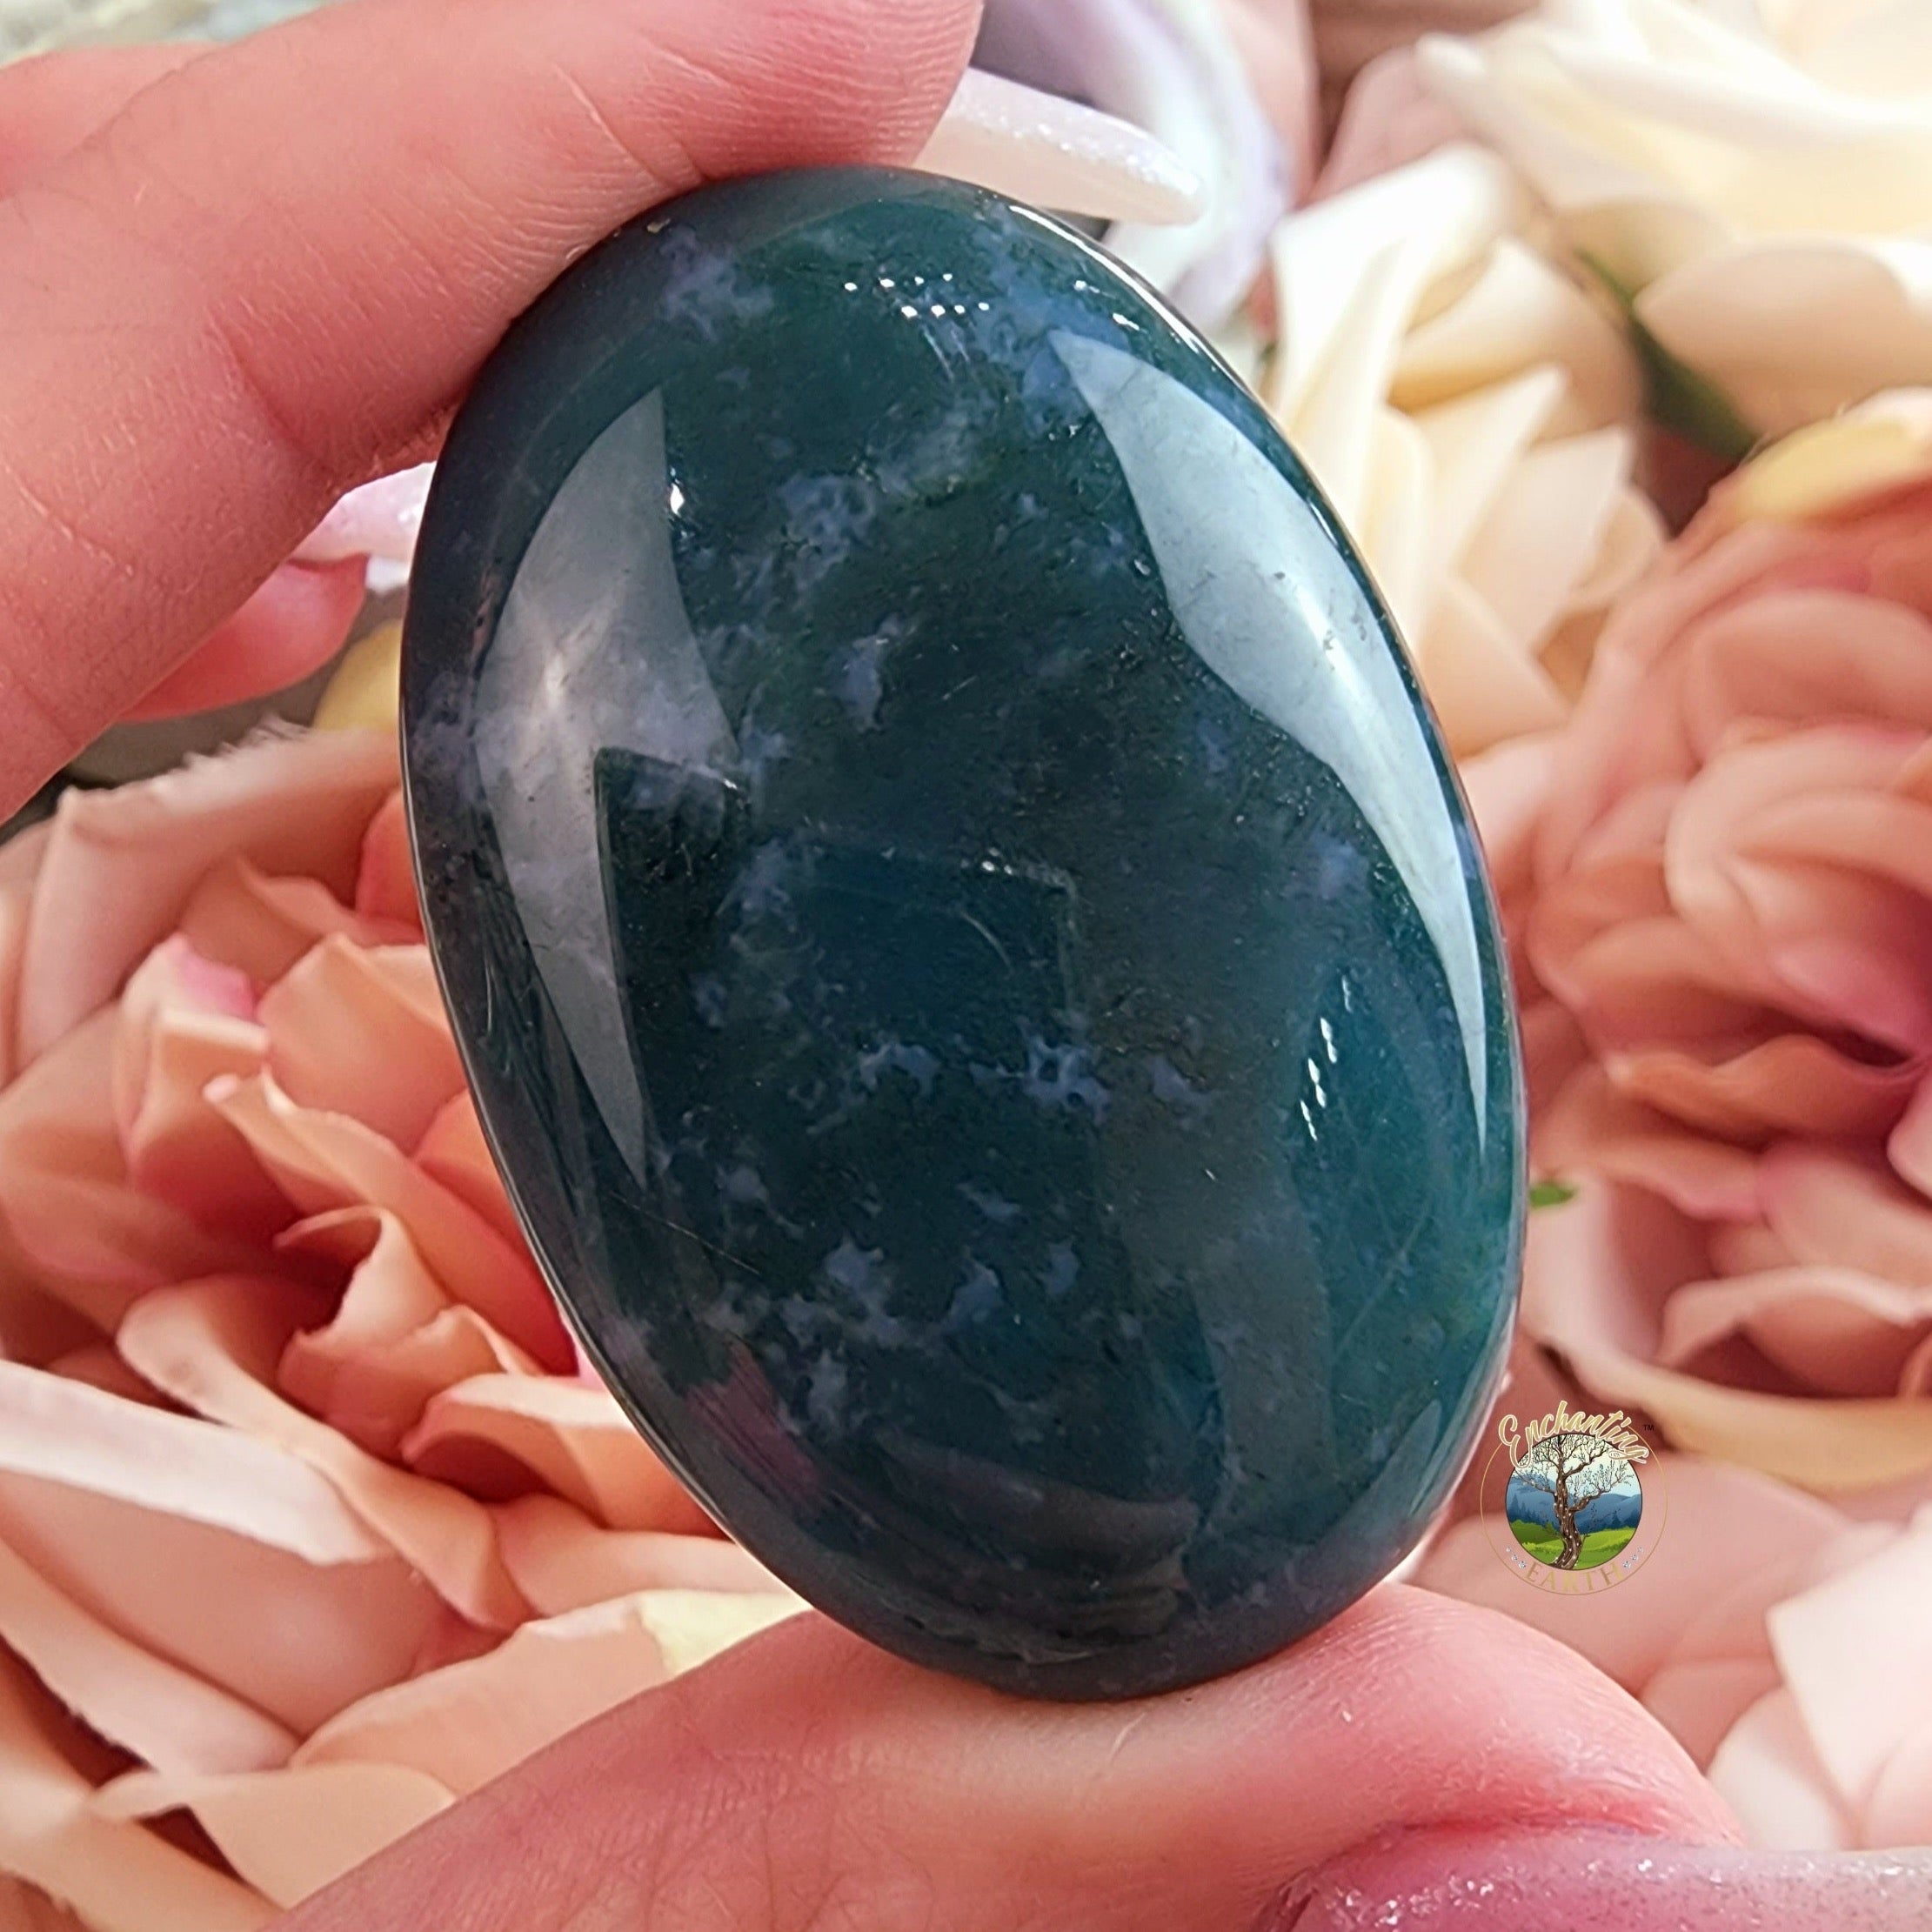 Moss Agate Palm for Addiction Healing, Grounding & Manifesting Dreams into Reality